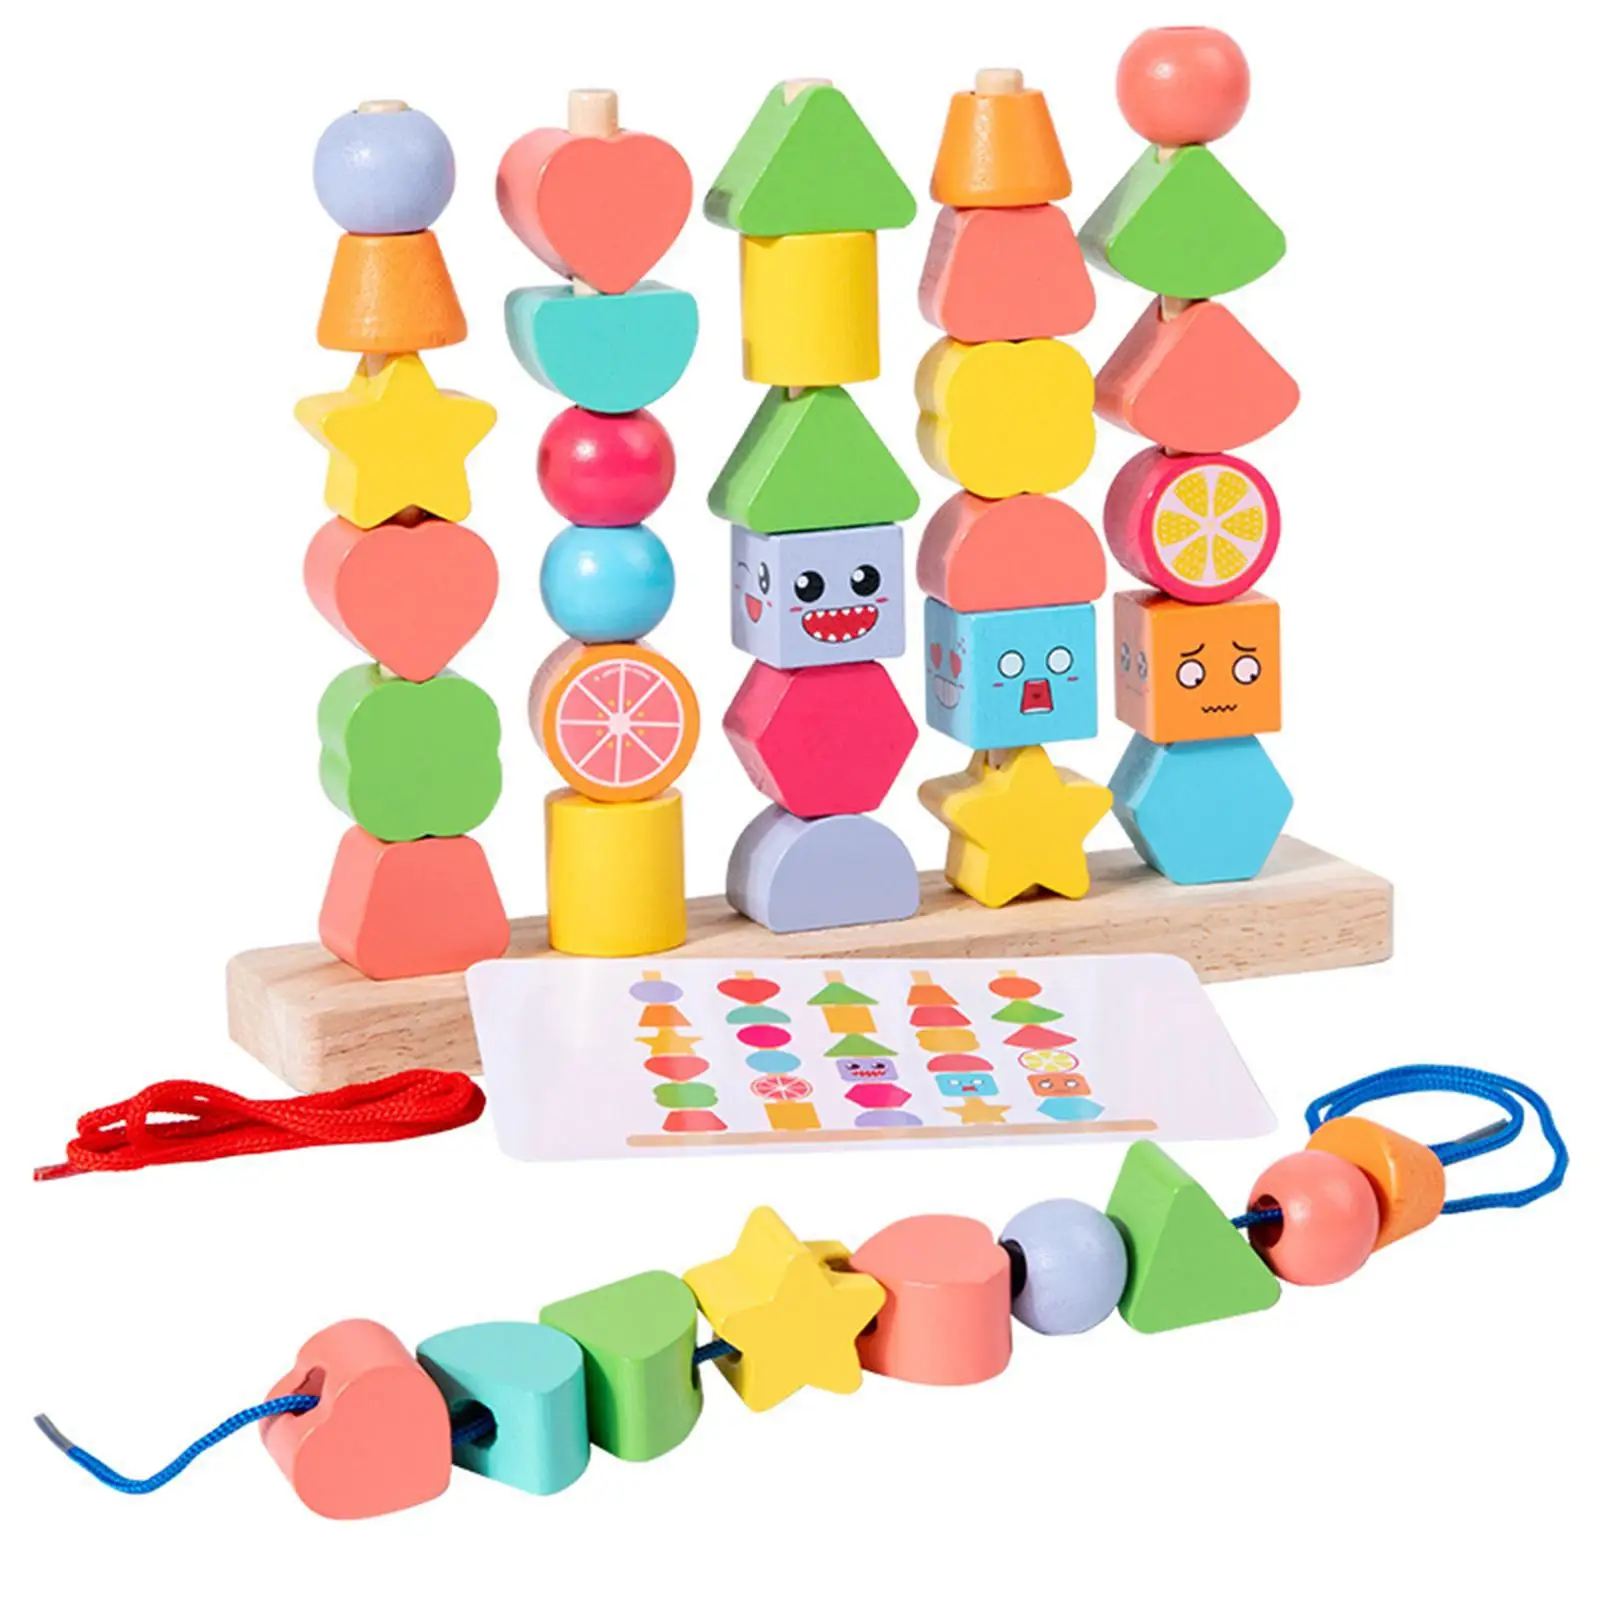 Wooden Beads Sequencing Toy Set Early Education Montessori Threading Toys Lacing Beads for Birthday Gift Children Kids Preschool